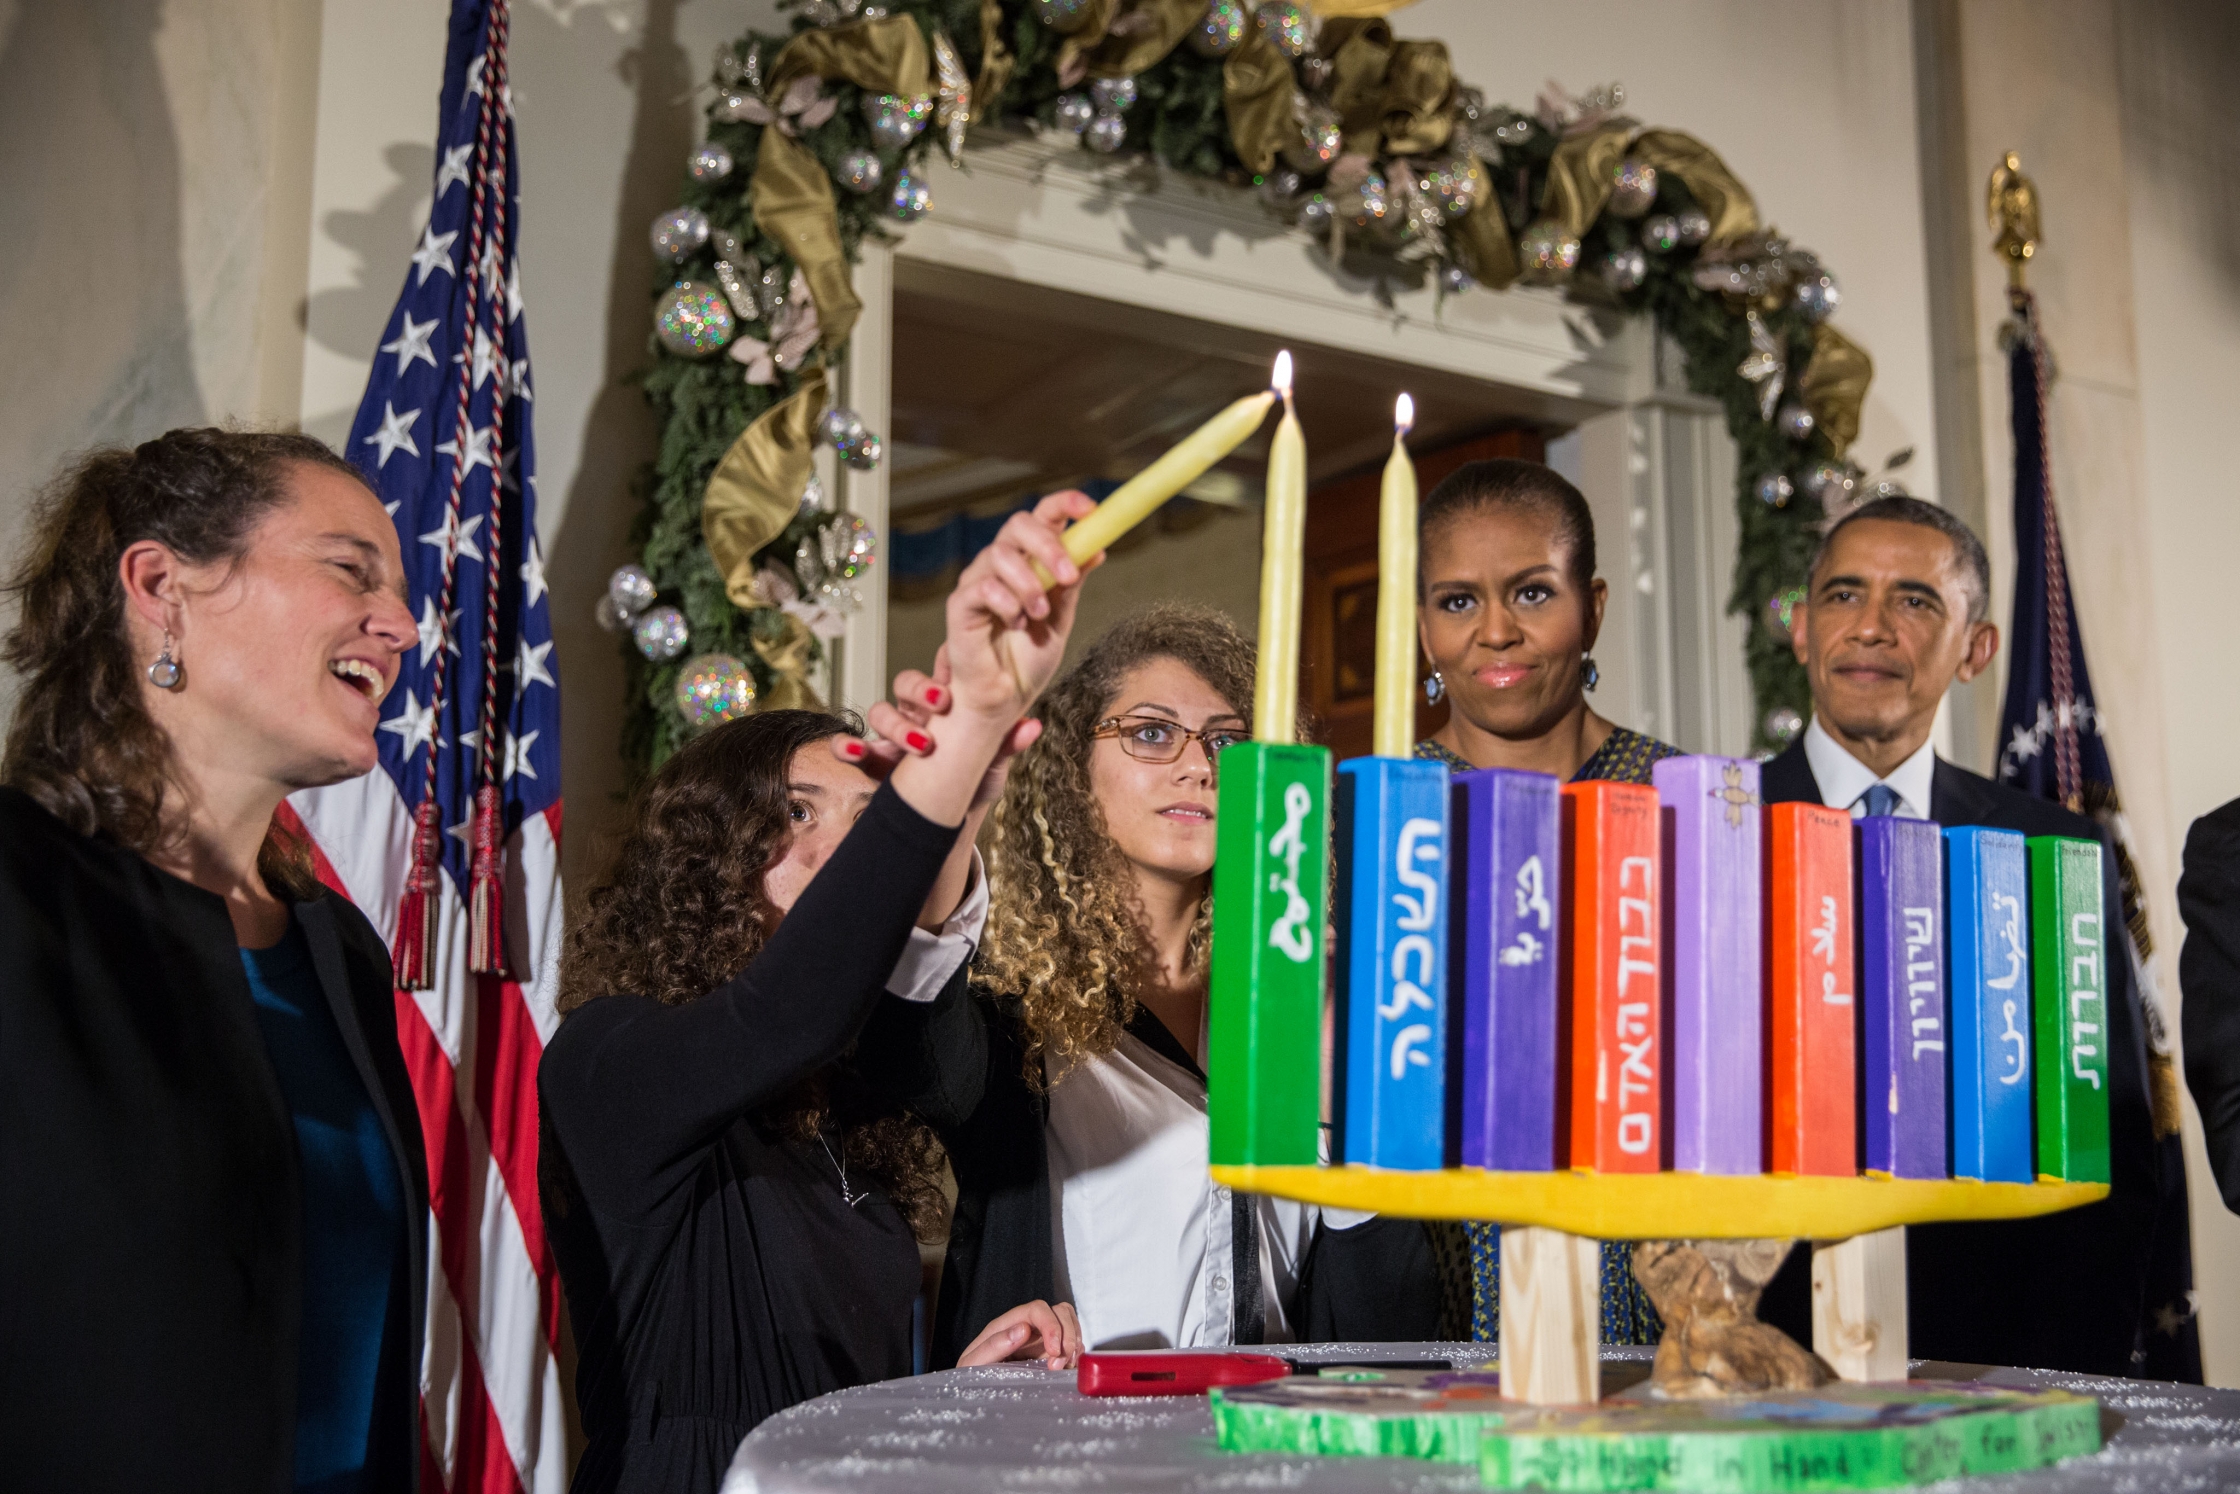 President Barack Obama, First Lady Michelle Obama, Rabbi Bradley Artson, and students from Hand in Hand participate in the Menorah lighting during the afternoon Hanukkah reception in the Grand Foyer of the White House, Dec. 17, 2014. (Official White House Photo by Pete Souza)